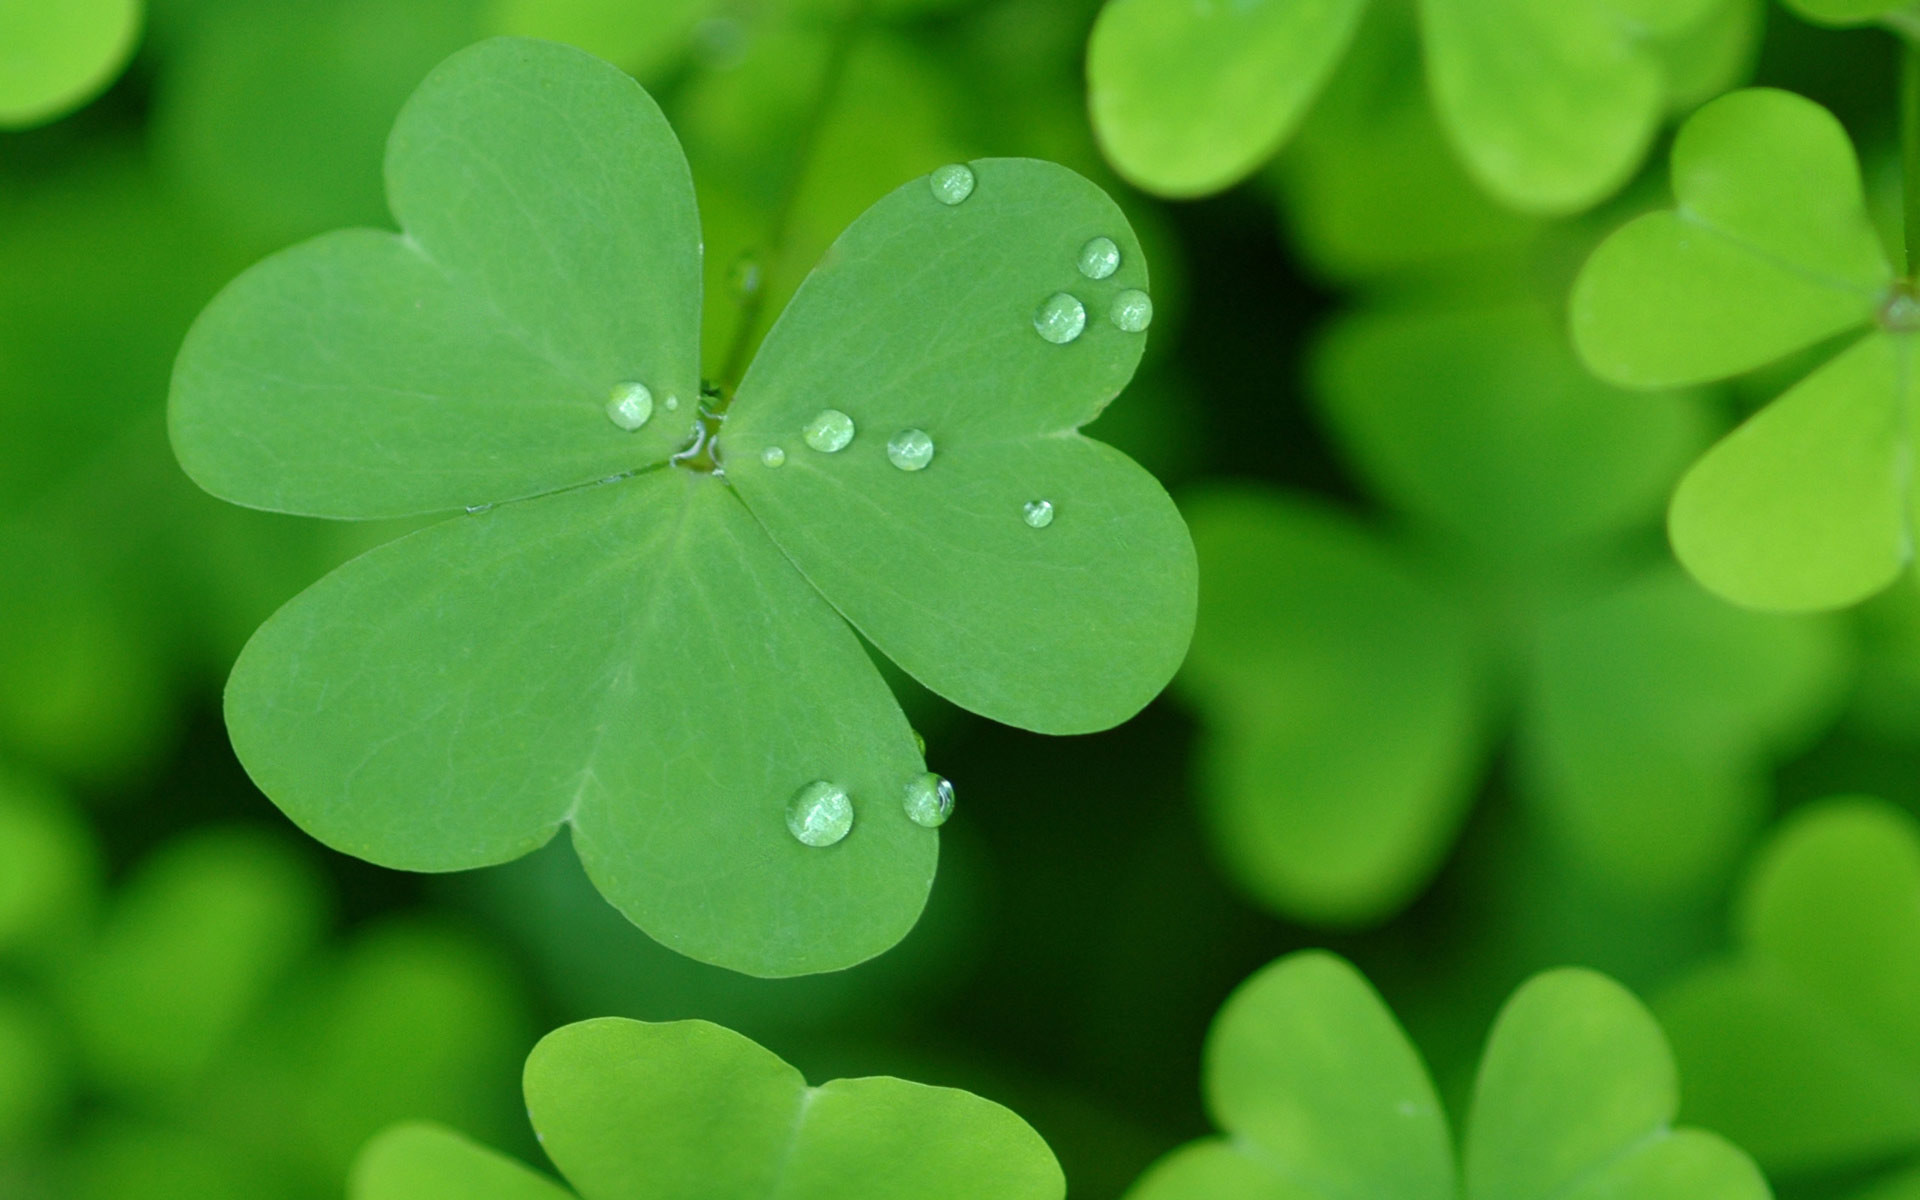 st-patricks-day-wallpaper-backgrounds-52-images